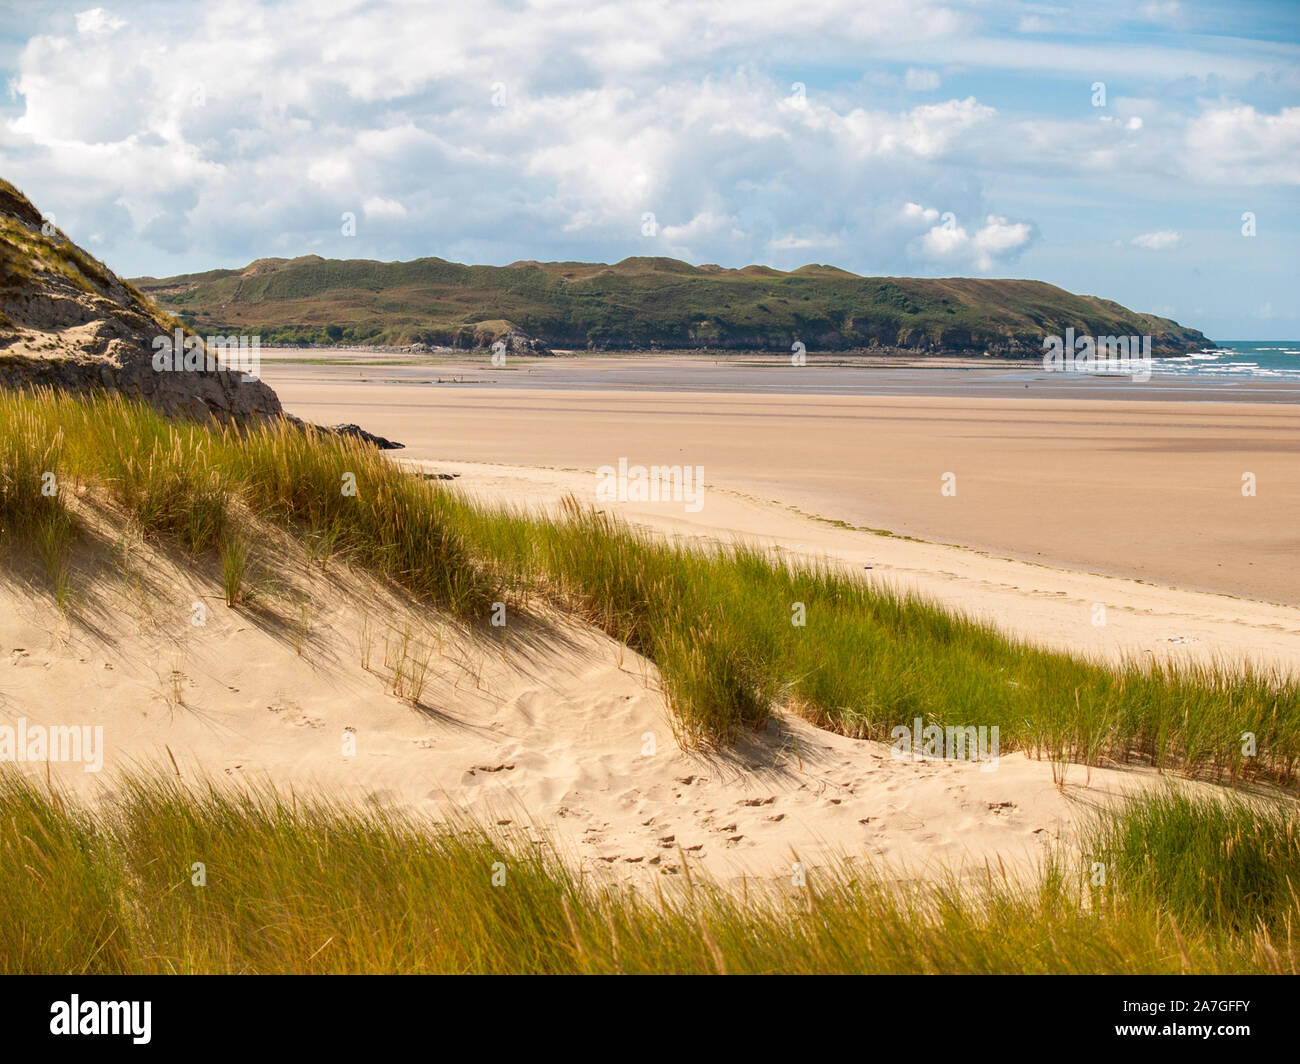 On Whiteford Sands looking Southwest towards Broughton Bay. Marram grass on the dunes. AONB. Llanmadoc, North Gower, Wales, UK. Stock Photo